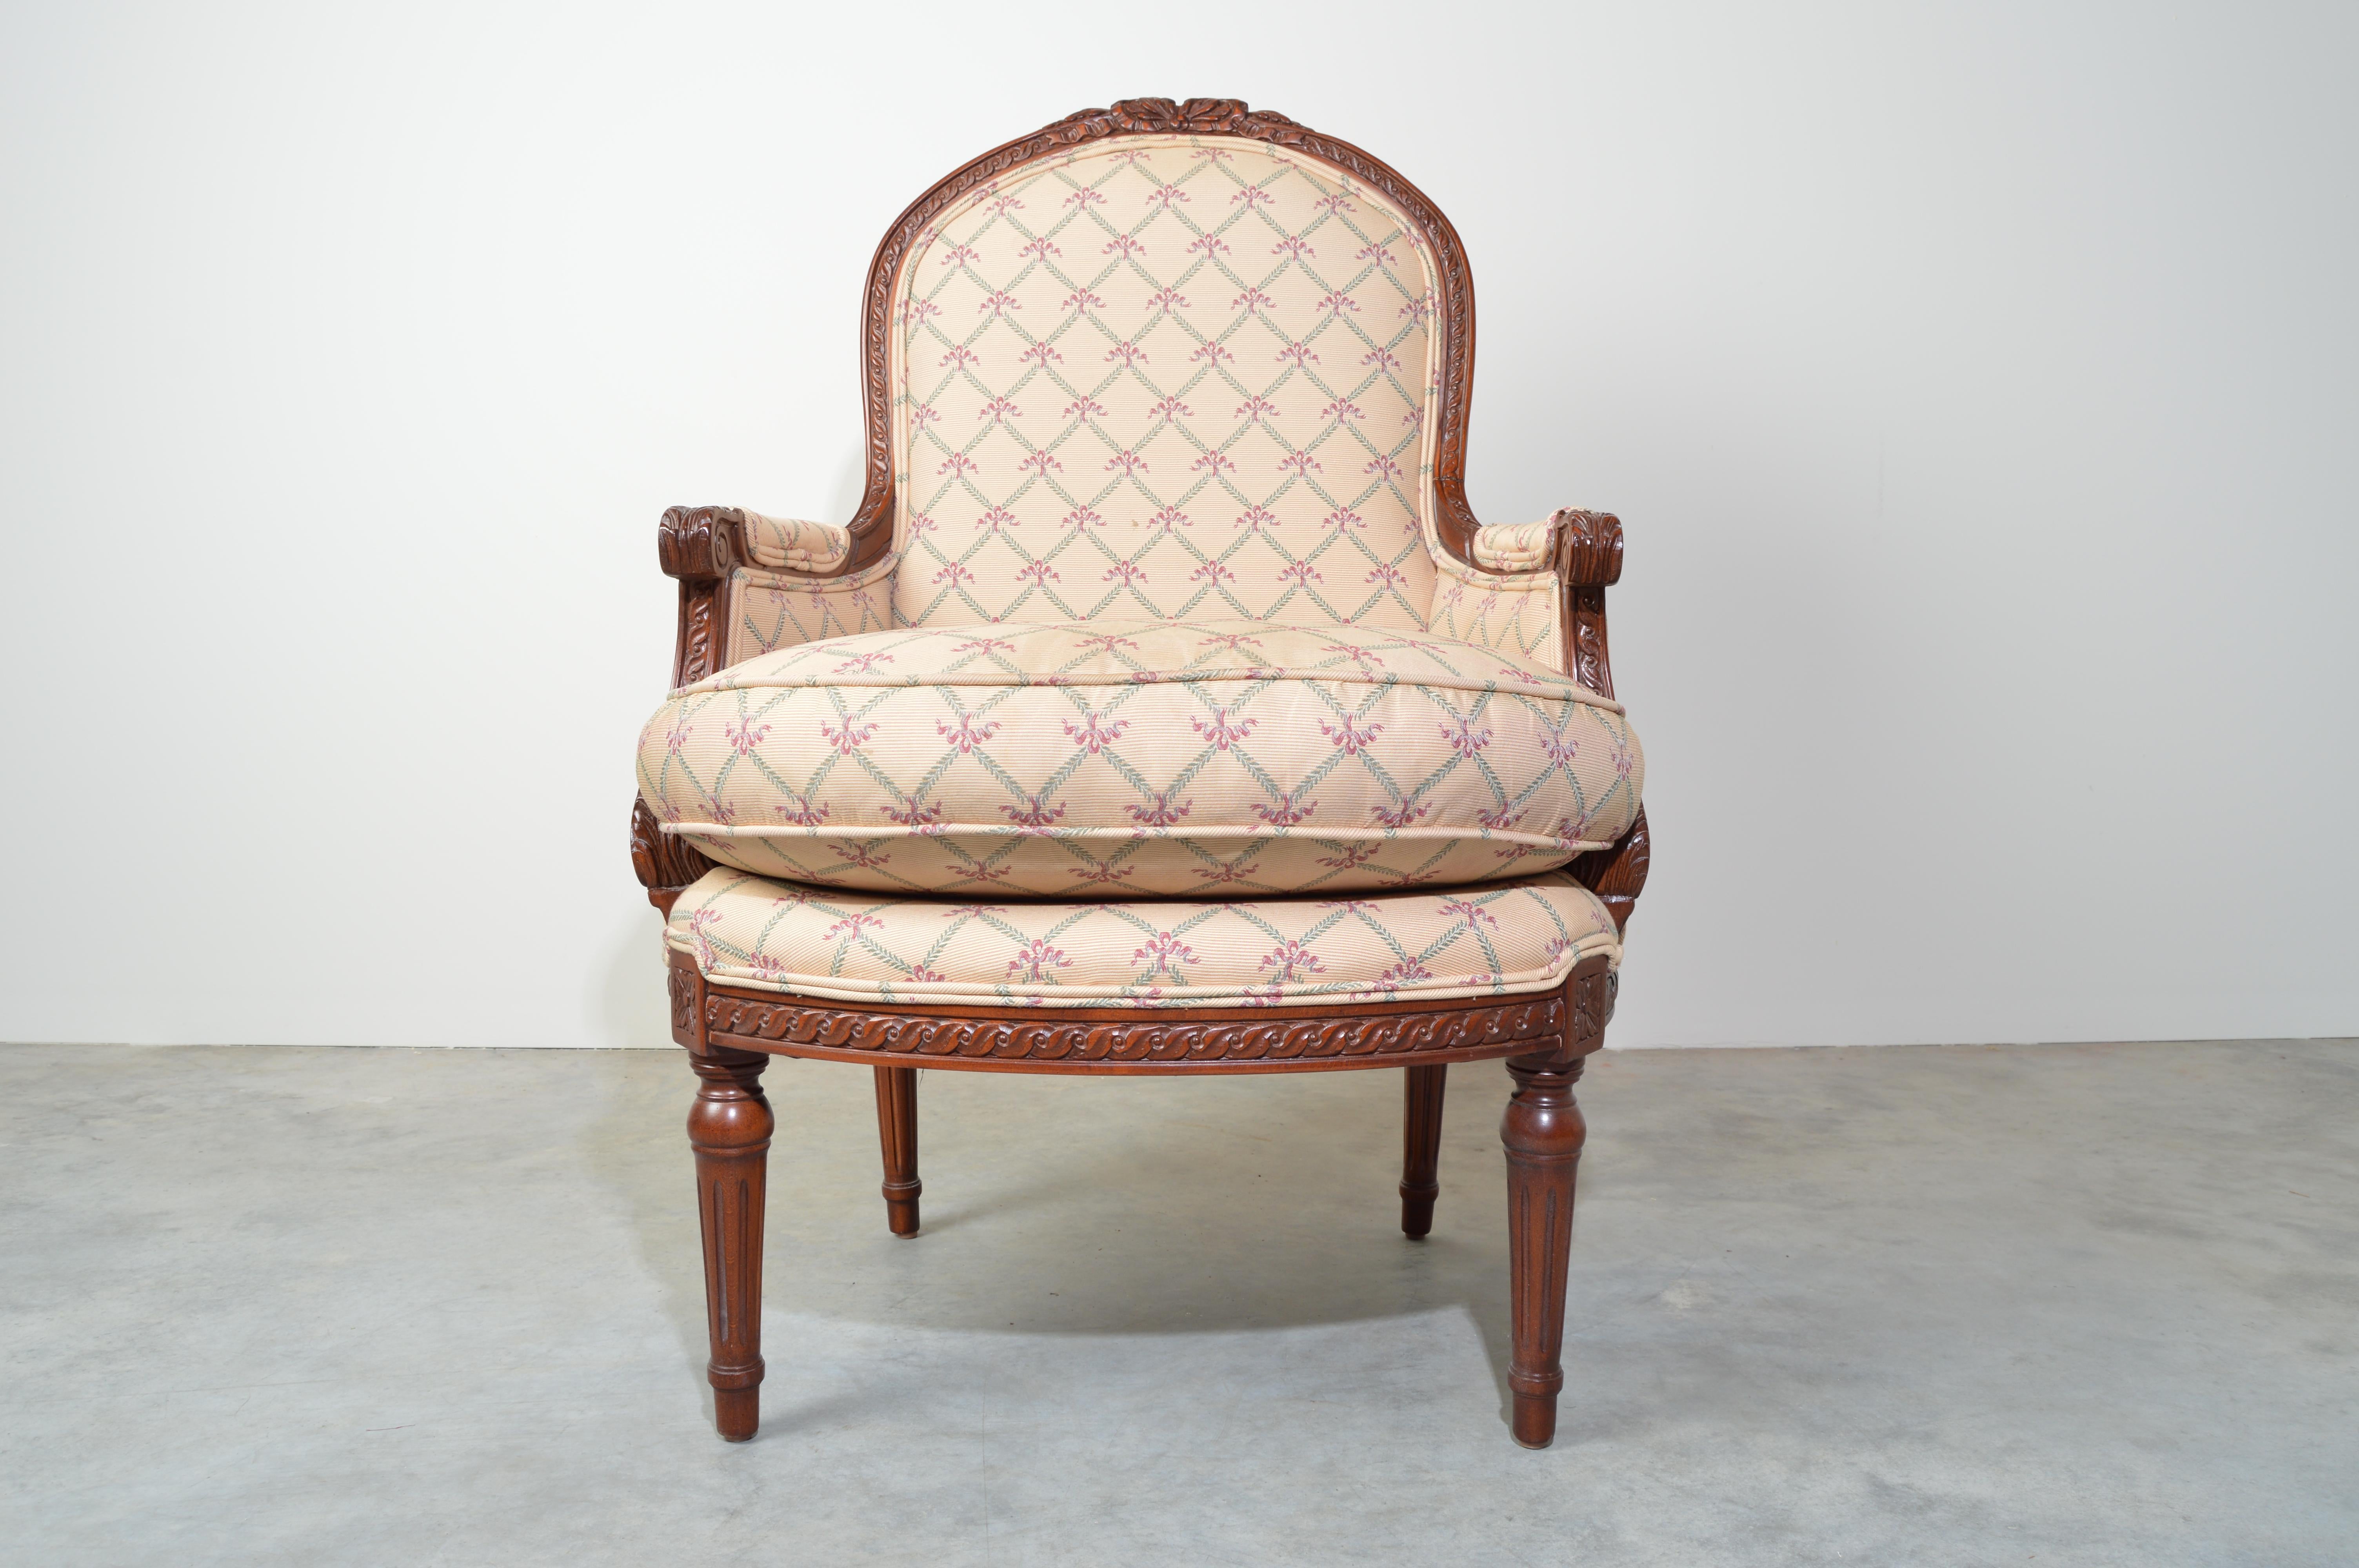 A beautiful Louis XVI style easy chair by Hickory Furniture Company for their Heirloom line having carved mahogany frame with overstuffed seat cushion. Very nice vintage condition, solid, professionally cleaned and ready for use!